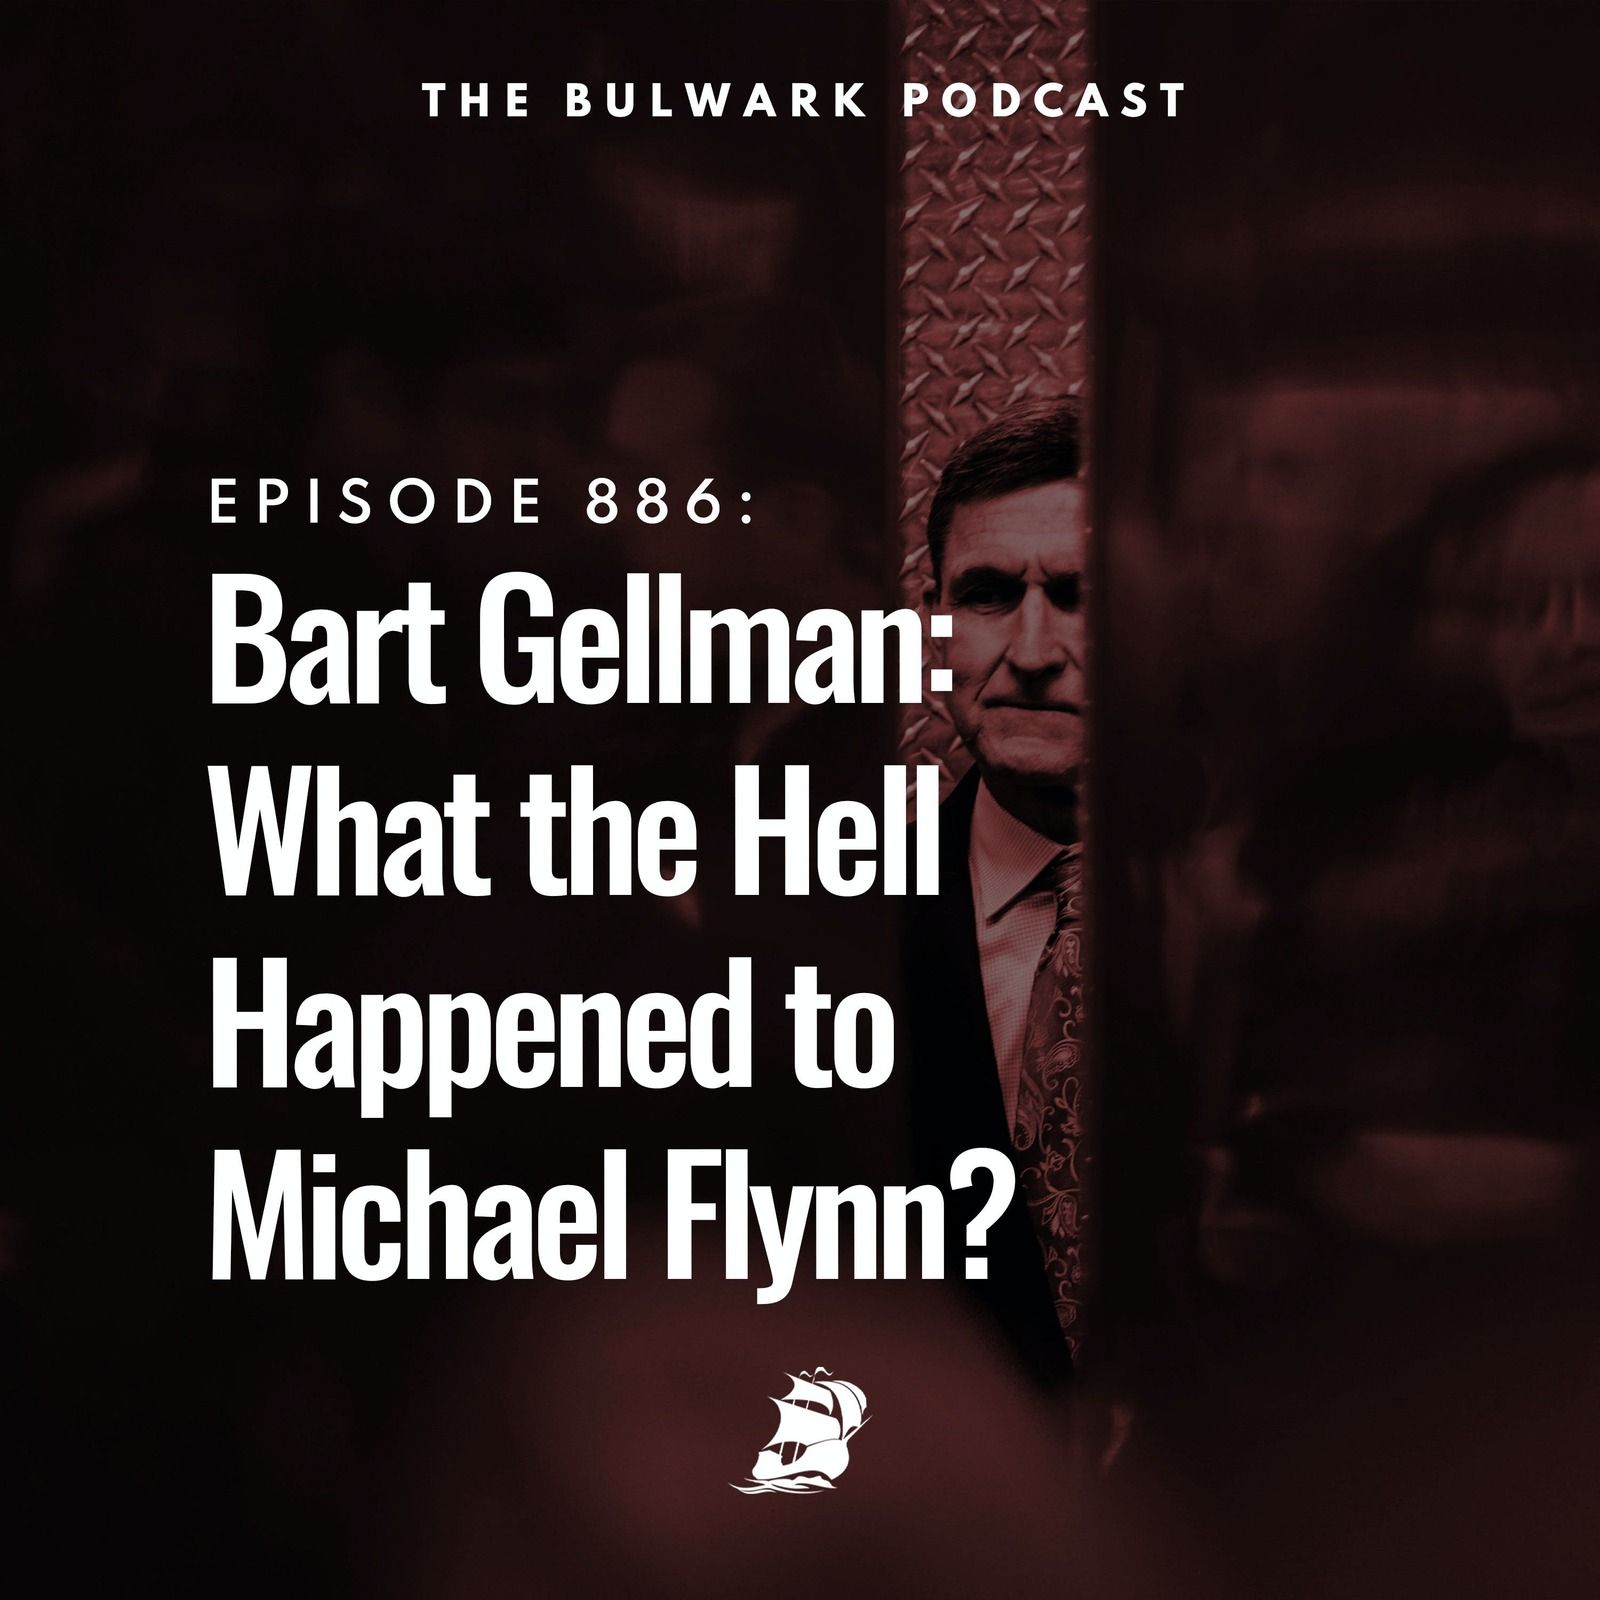 Bart Gellman: What the Hell Happened to Michael Flynn? by The Bulwark Podcast